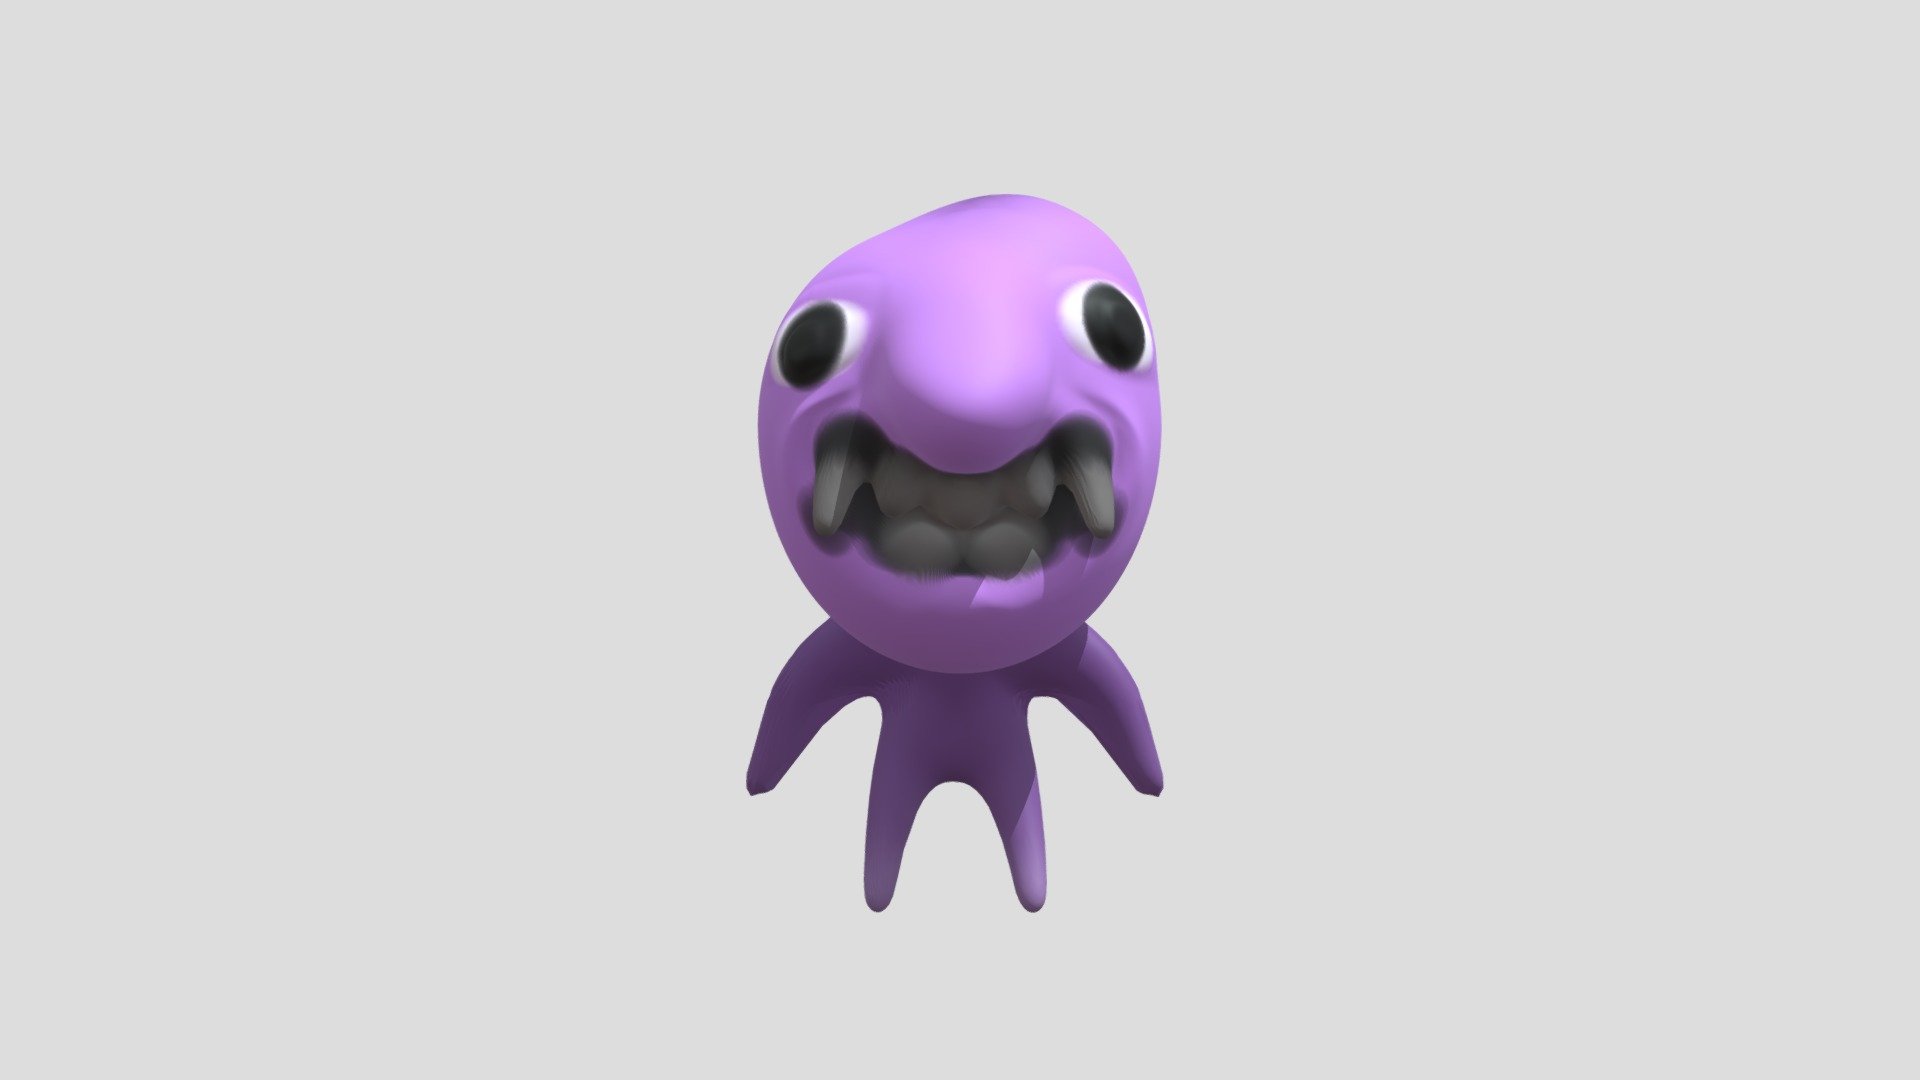 Ao Oni 3 official promotional image - MobyGames